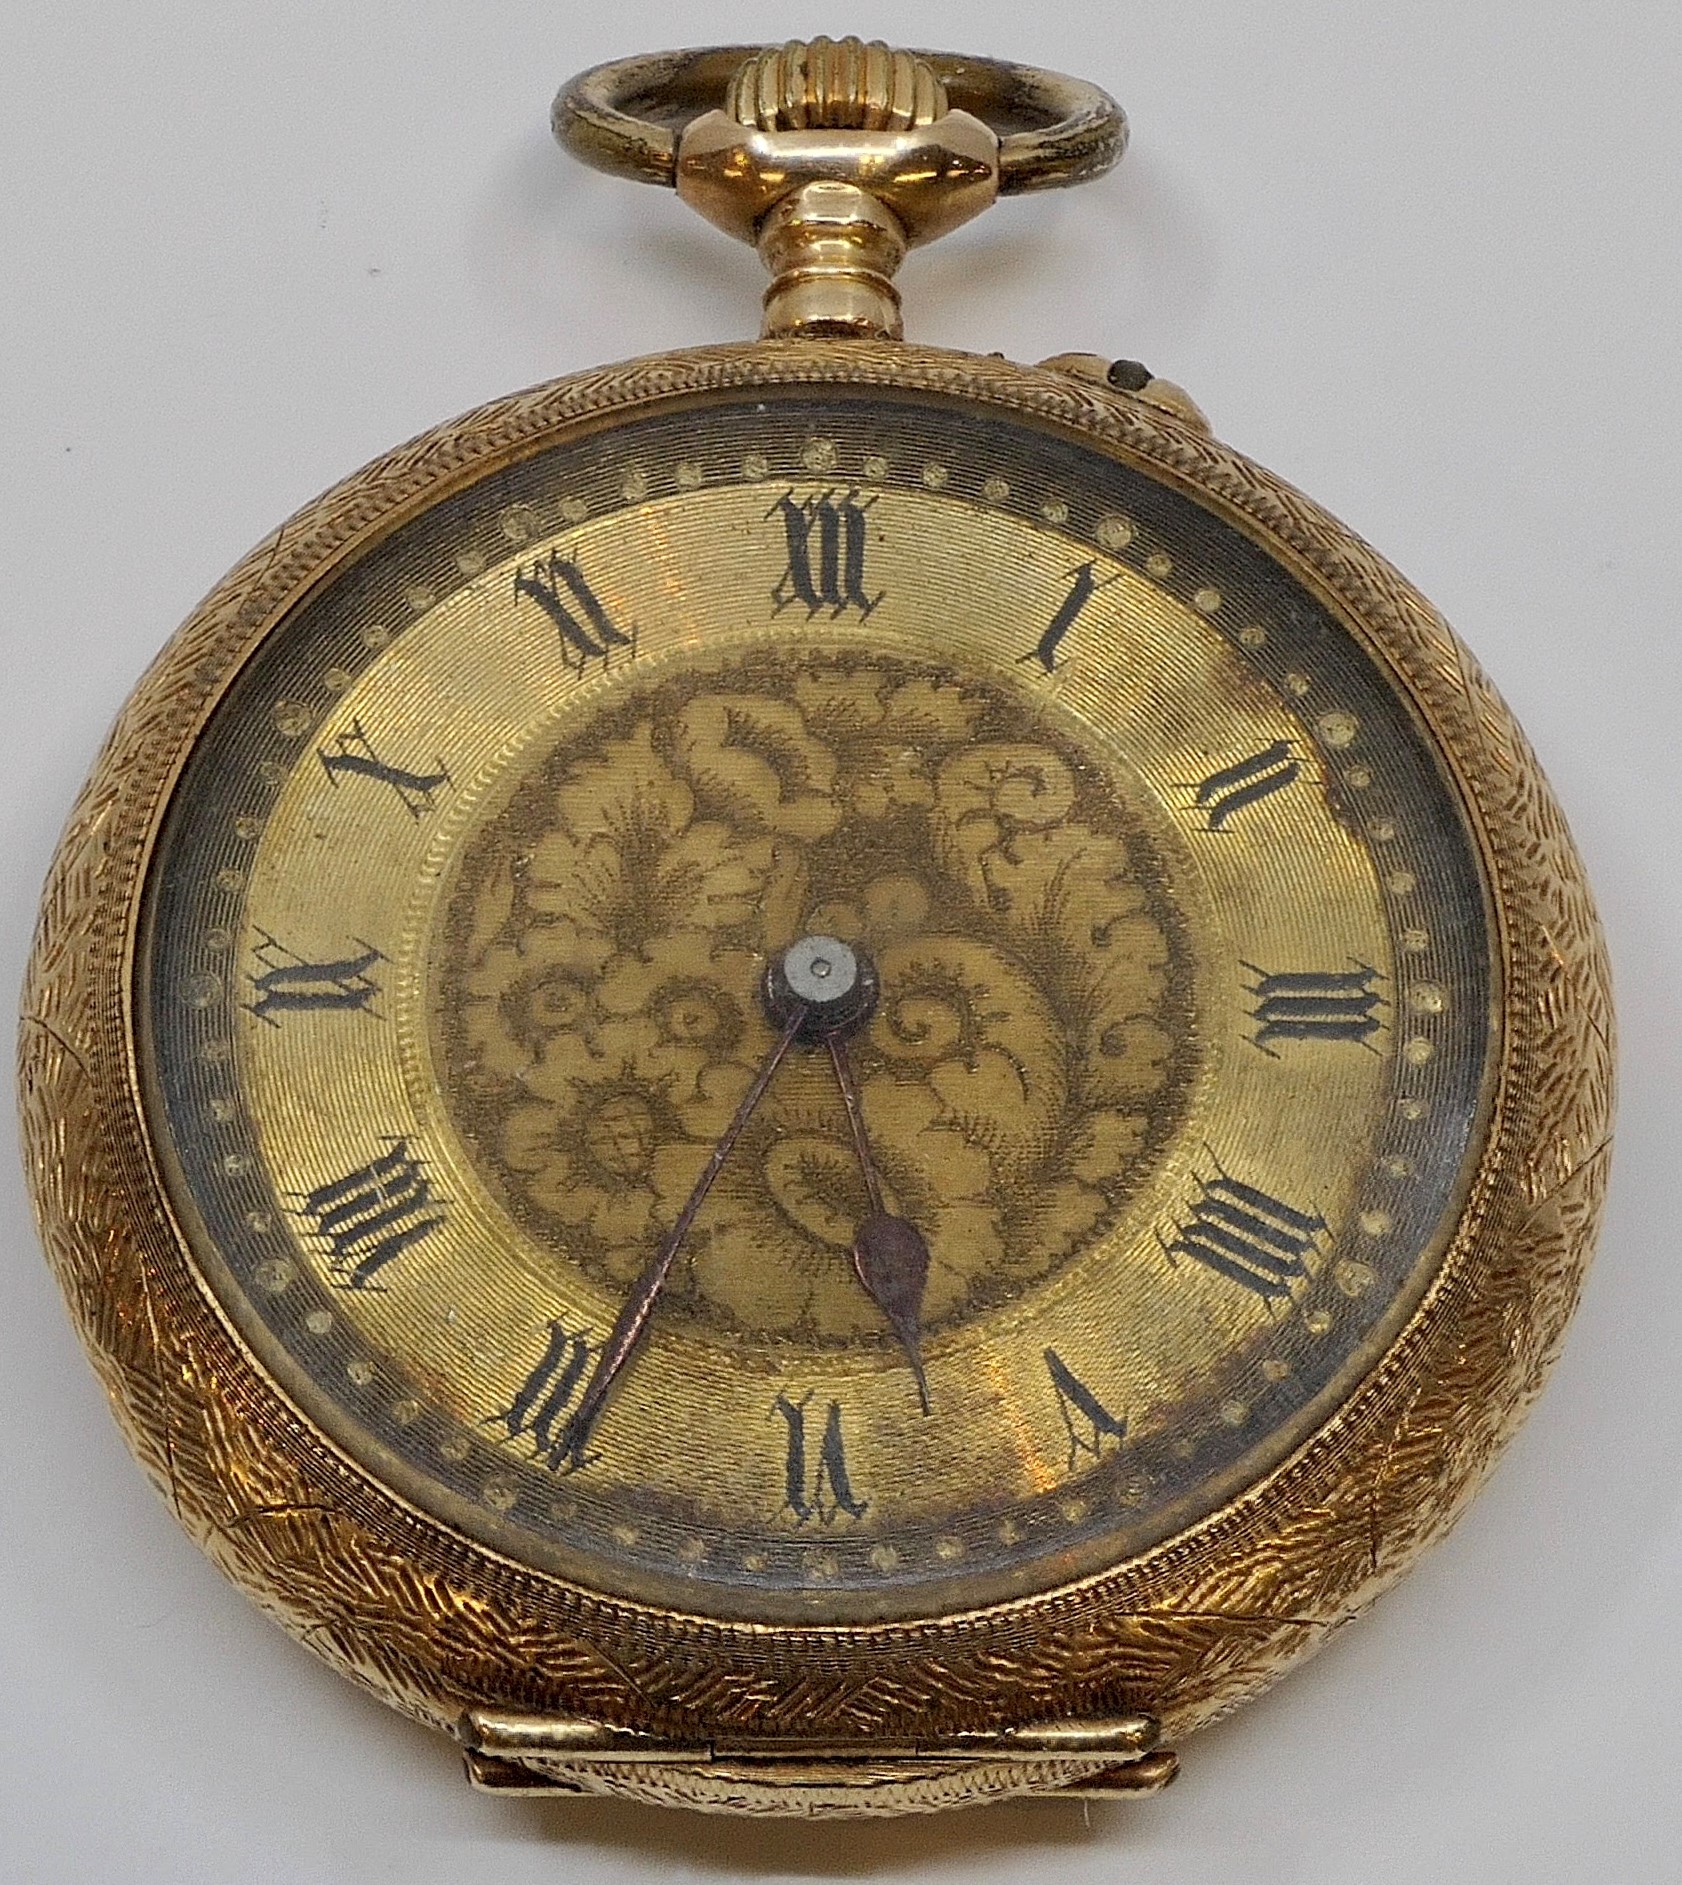 Yellow metal and gold-plated fob watch with foliate chasing, the dial with Roman chapter and